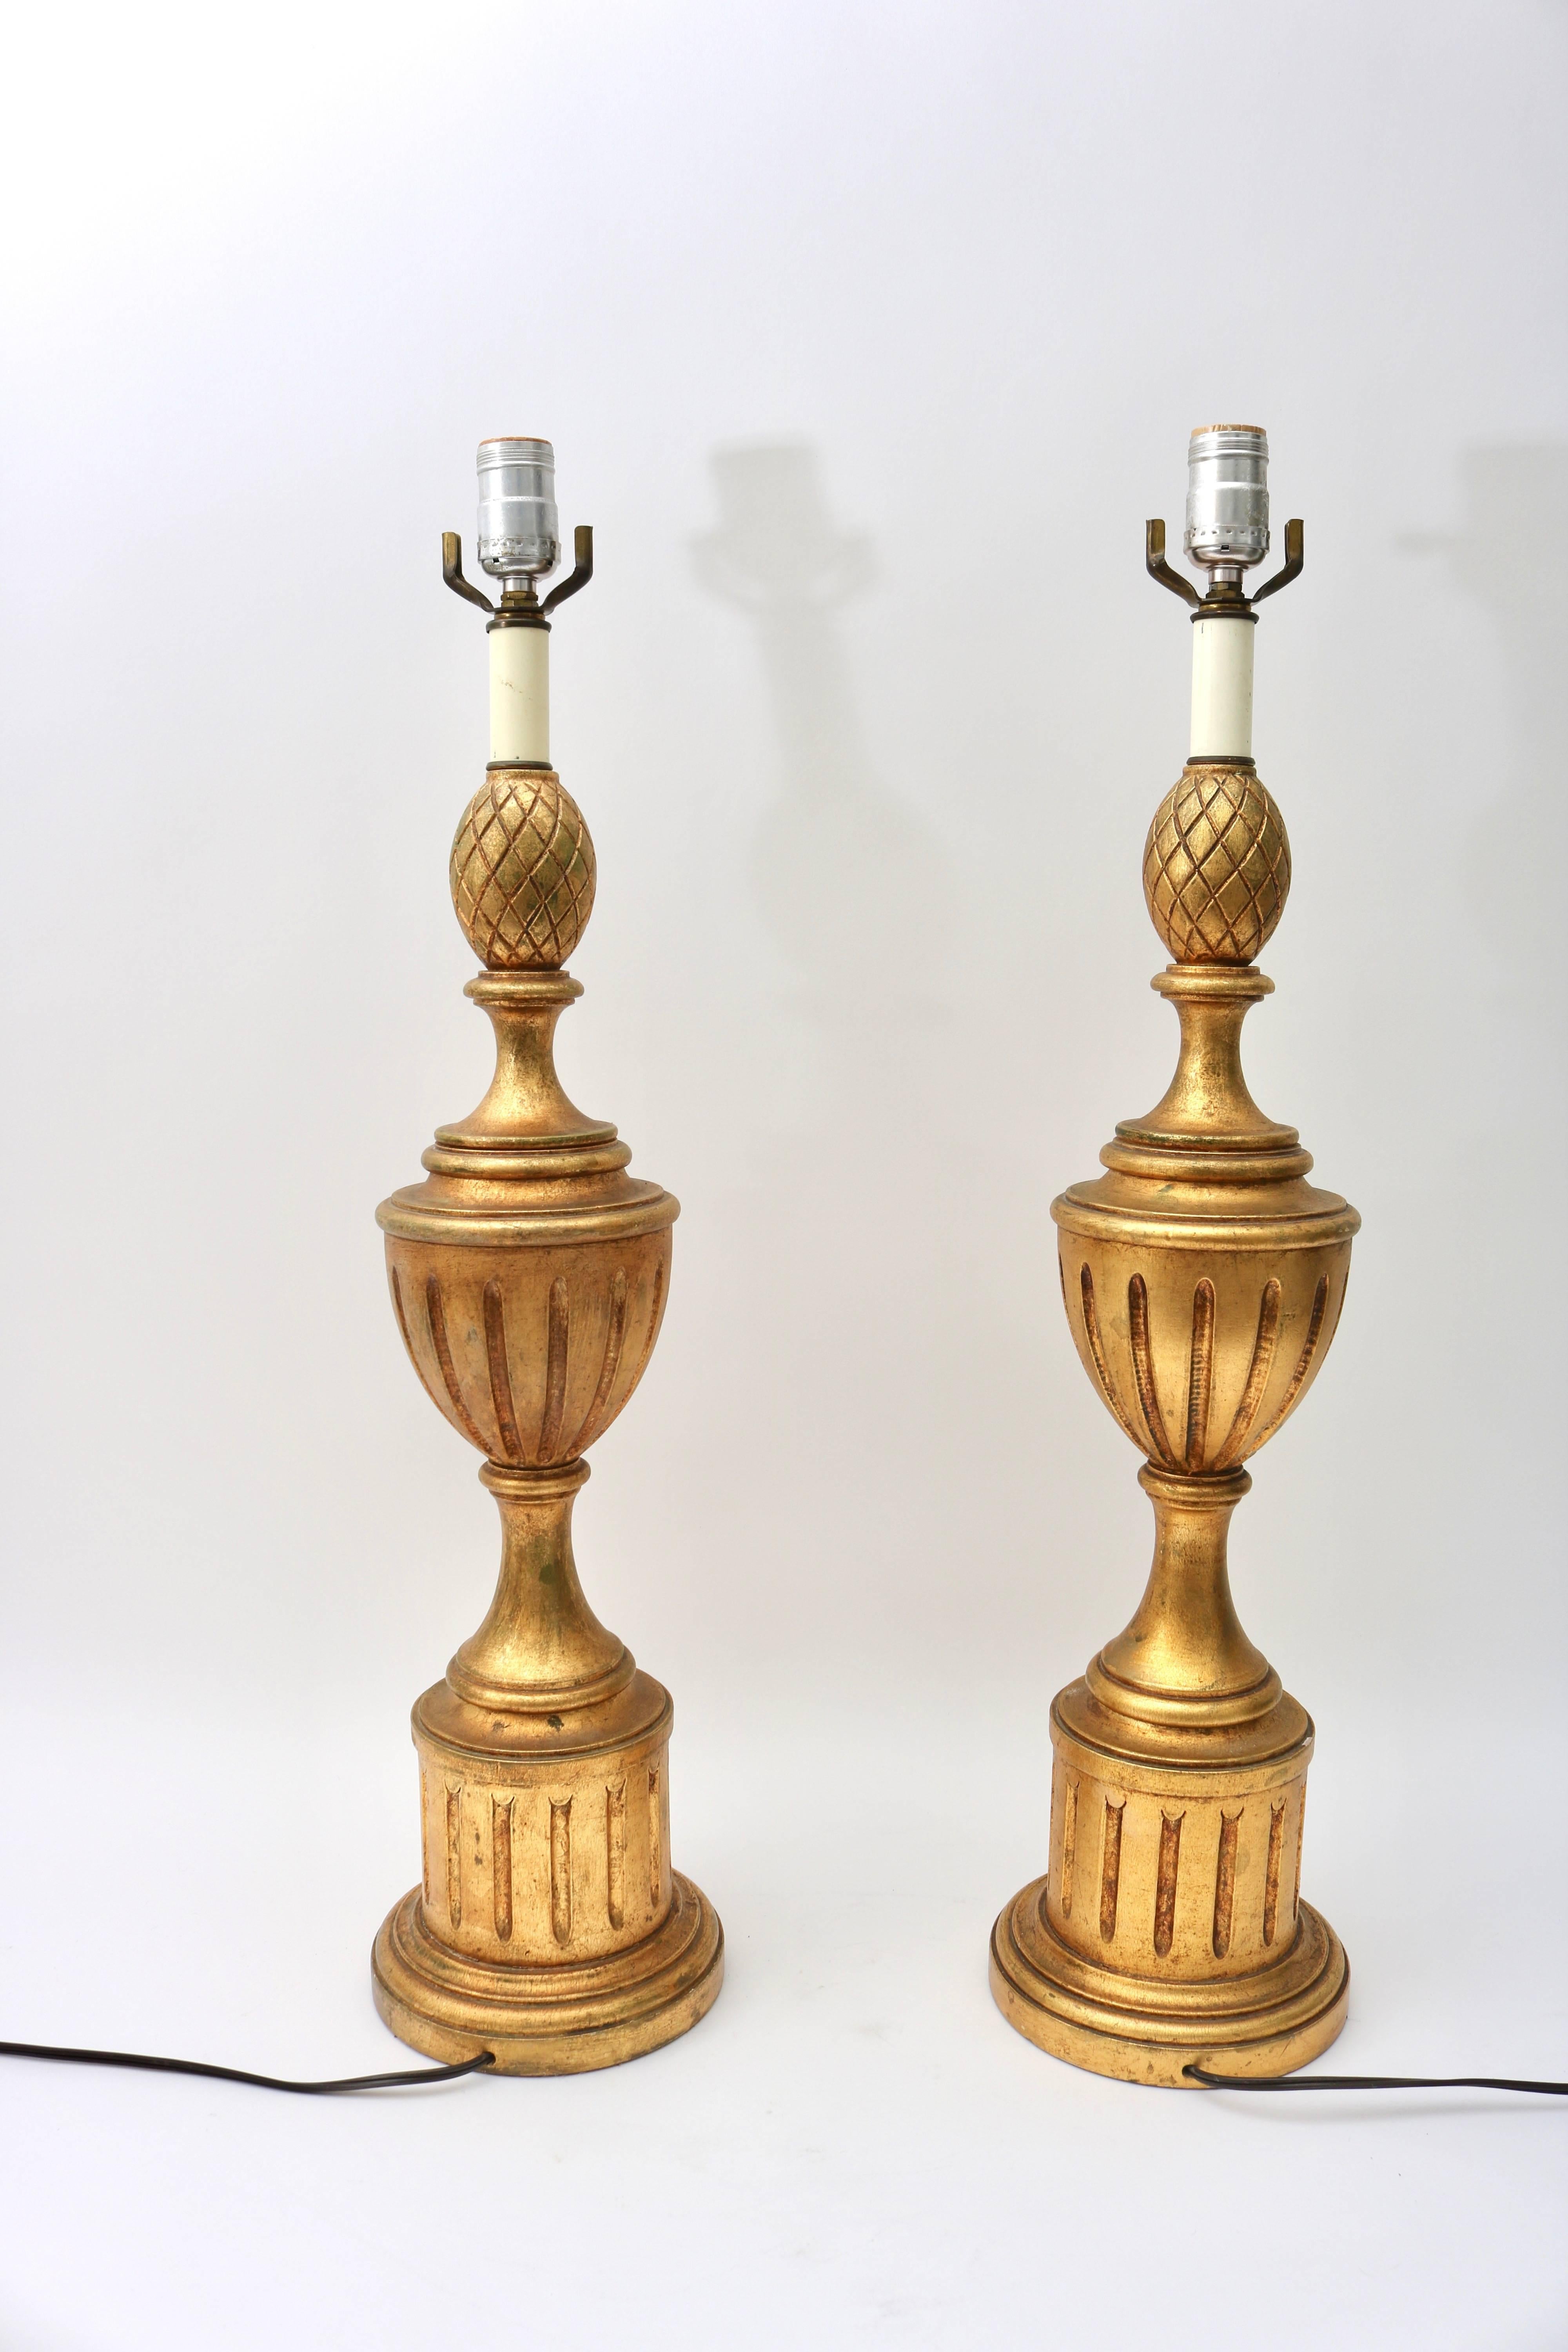 Hollywood Regency Pair of Louis XVI Style Urn-Form Table Lamps in a Bright, Antique Gold Finish